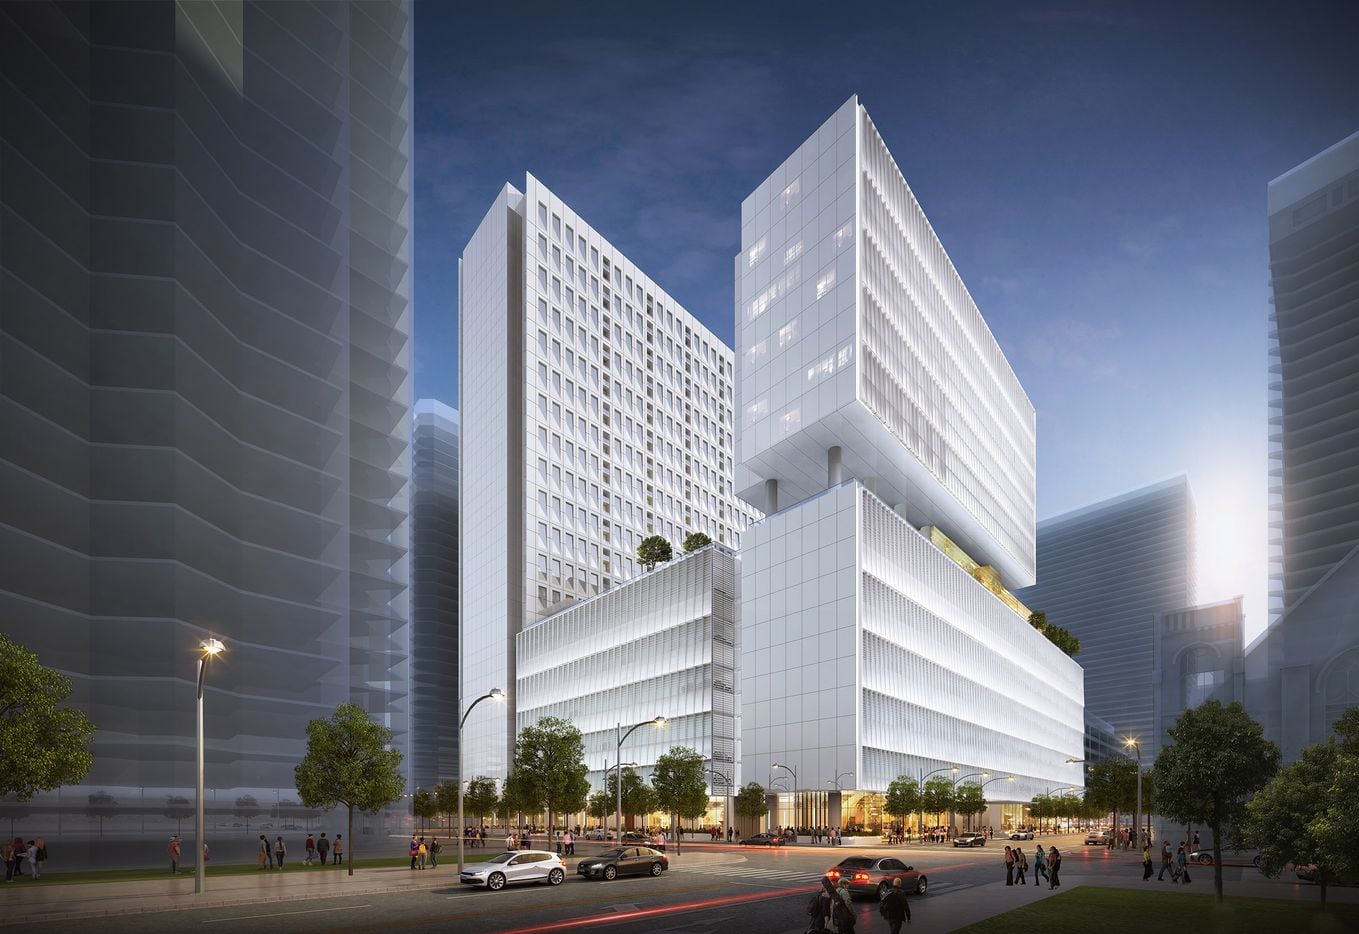 The new high-rise mixed-use project across the street will have retail, more than 2,000 parking spaces, a hotel and apartments.